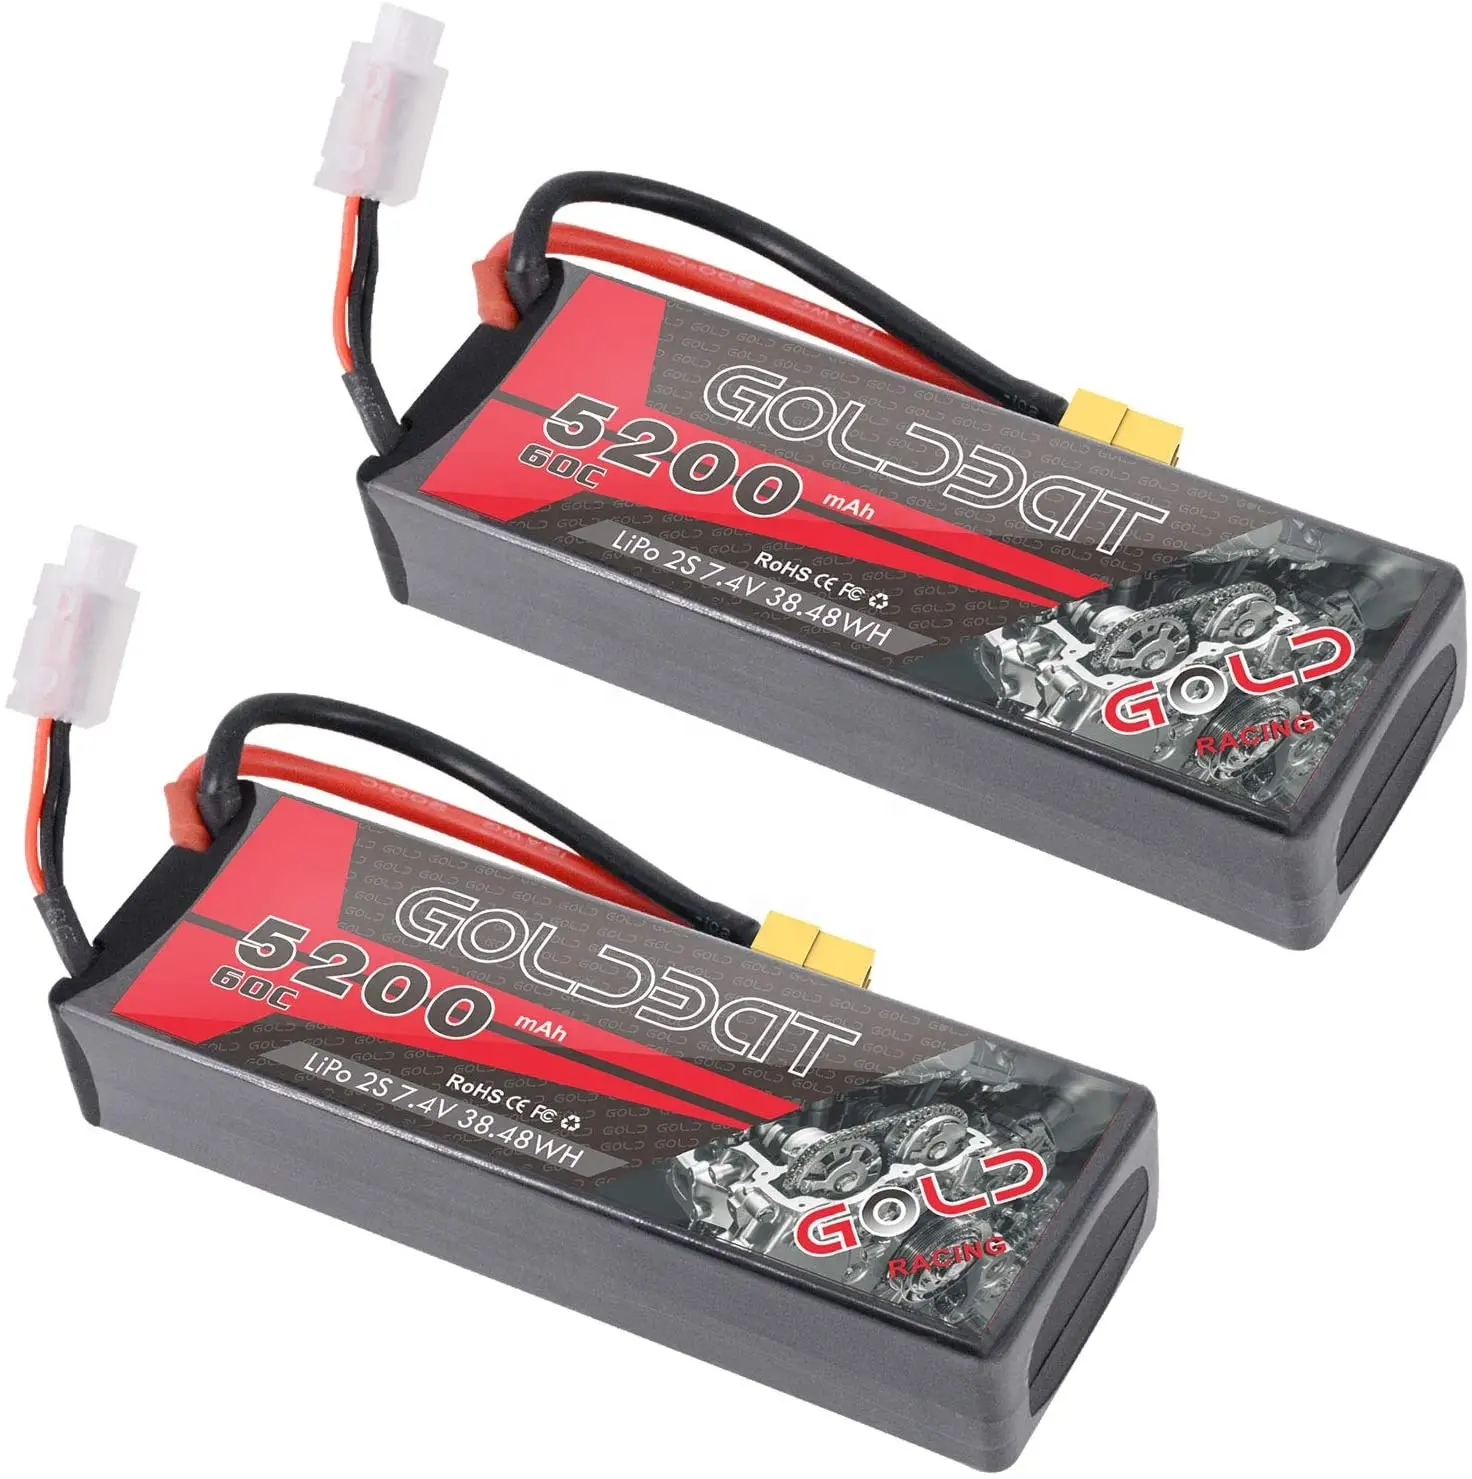 GOLDBAT Factory 60C 2S 5200mAh 7.4V Rechargeable Lipo Lithium Battery Pack for RC Racing Car/Truck/Boat Toys